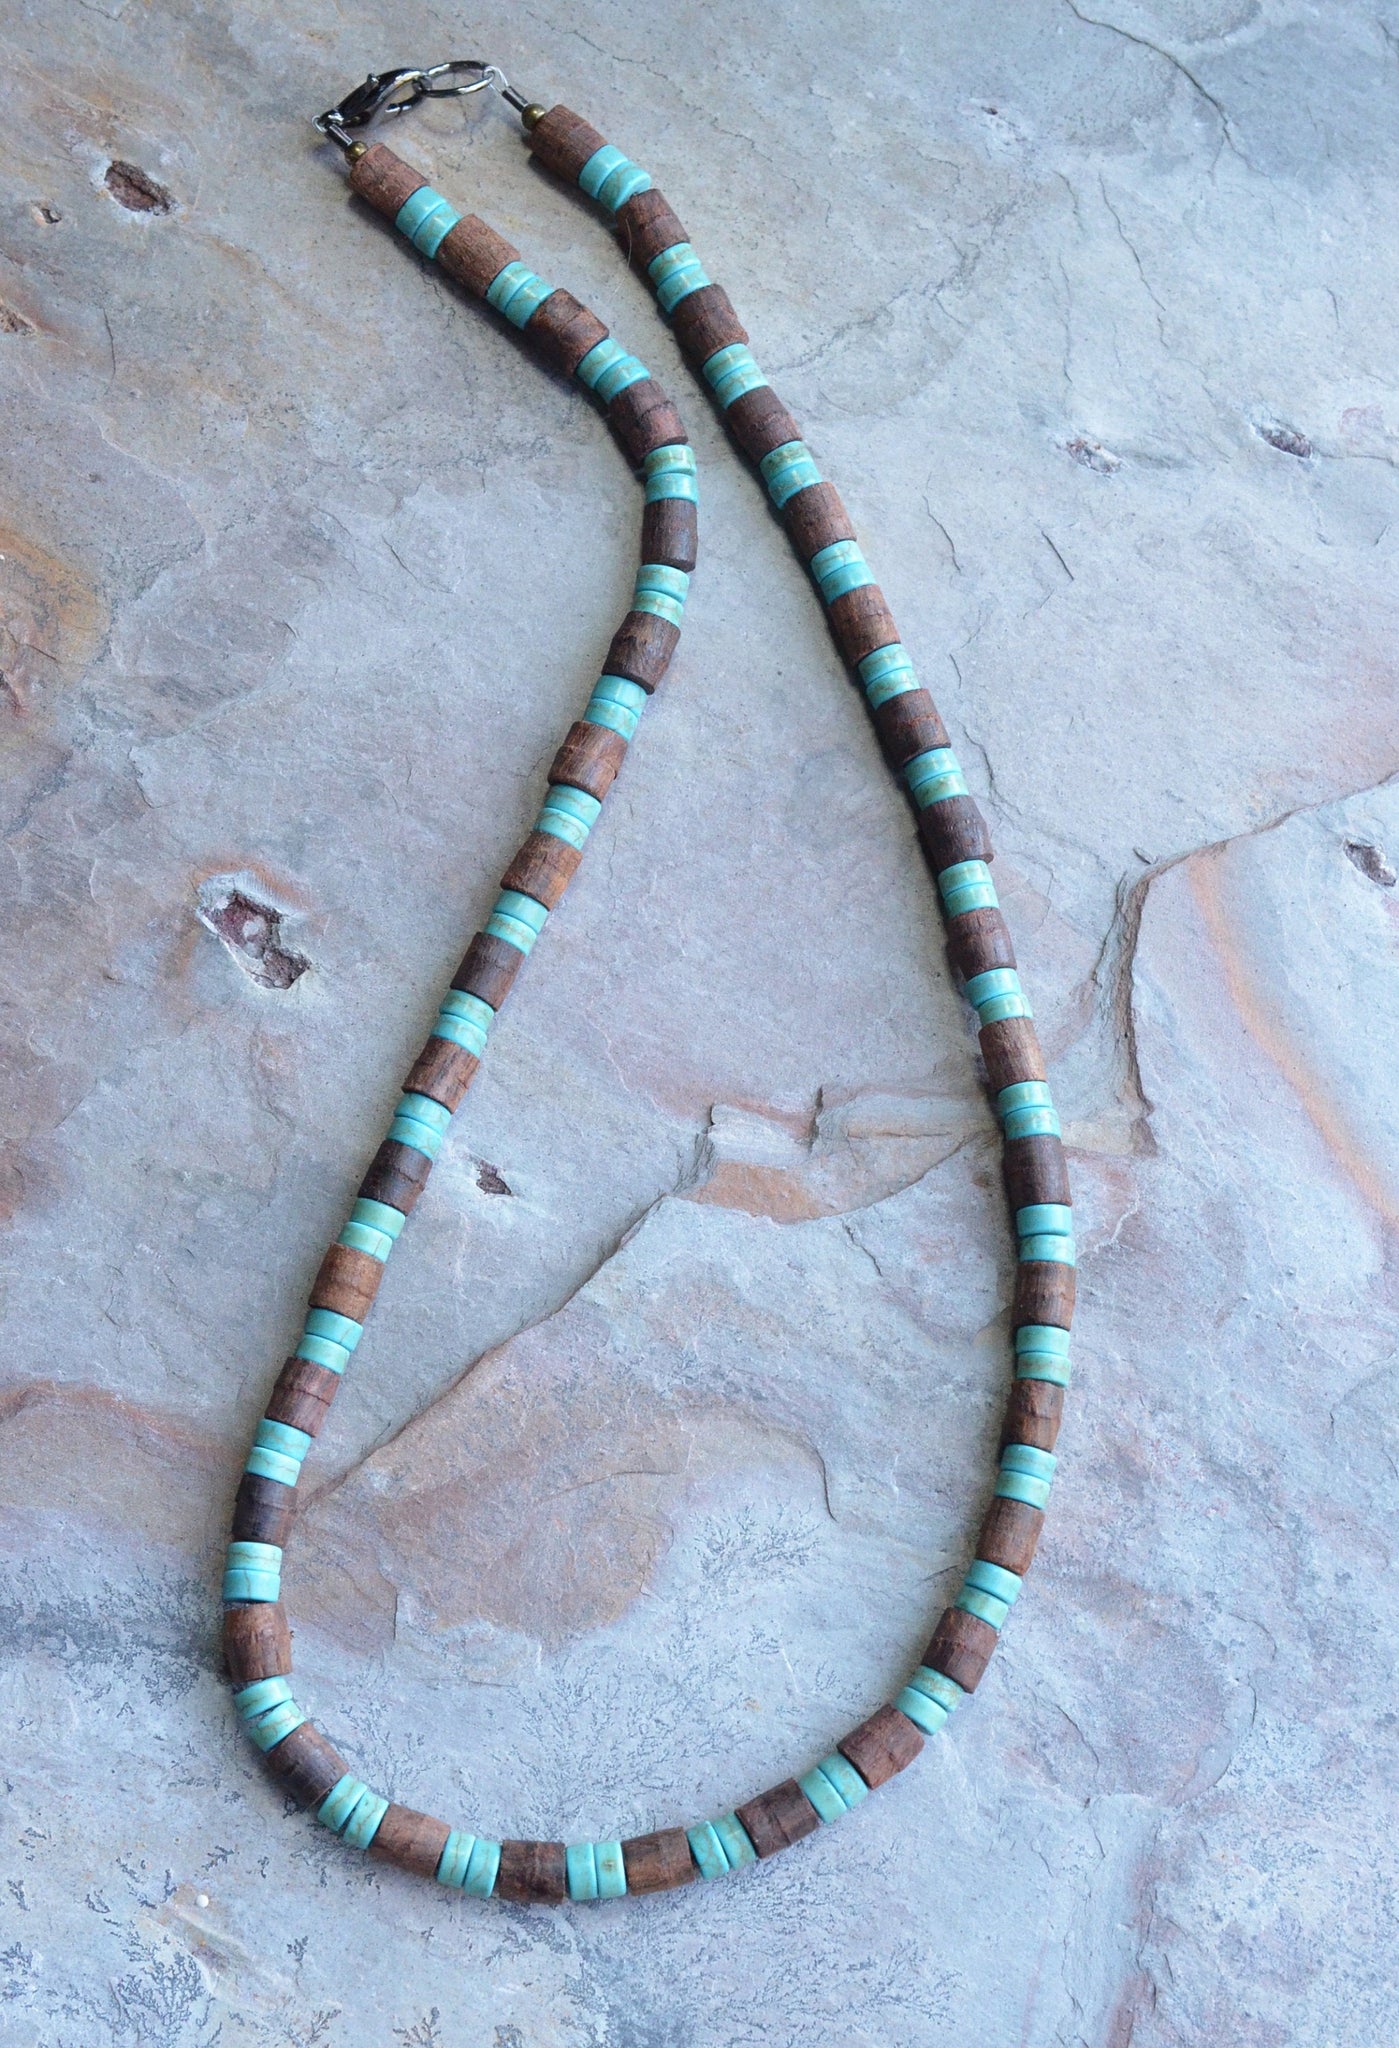 Vintage Turquoise Mens Necklace With Ring Accent Leather Chain Pendant For  Everyday Wear From Qipaoliu, $12.12 | DHgate.Com